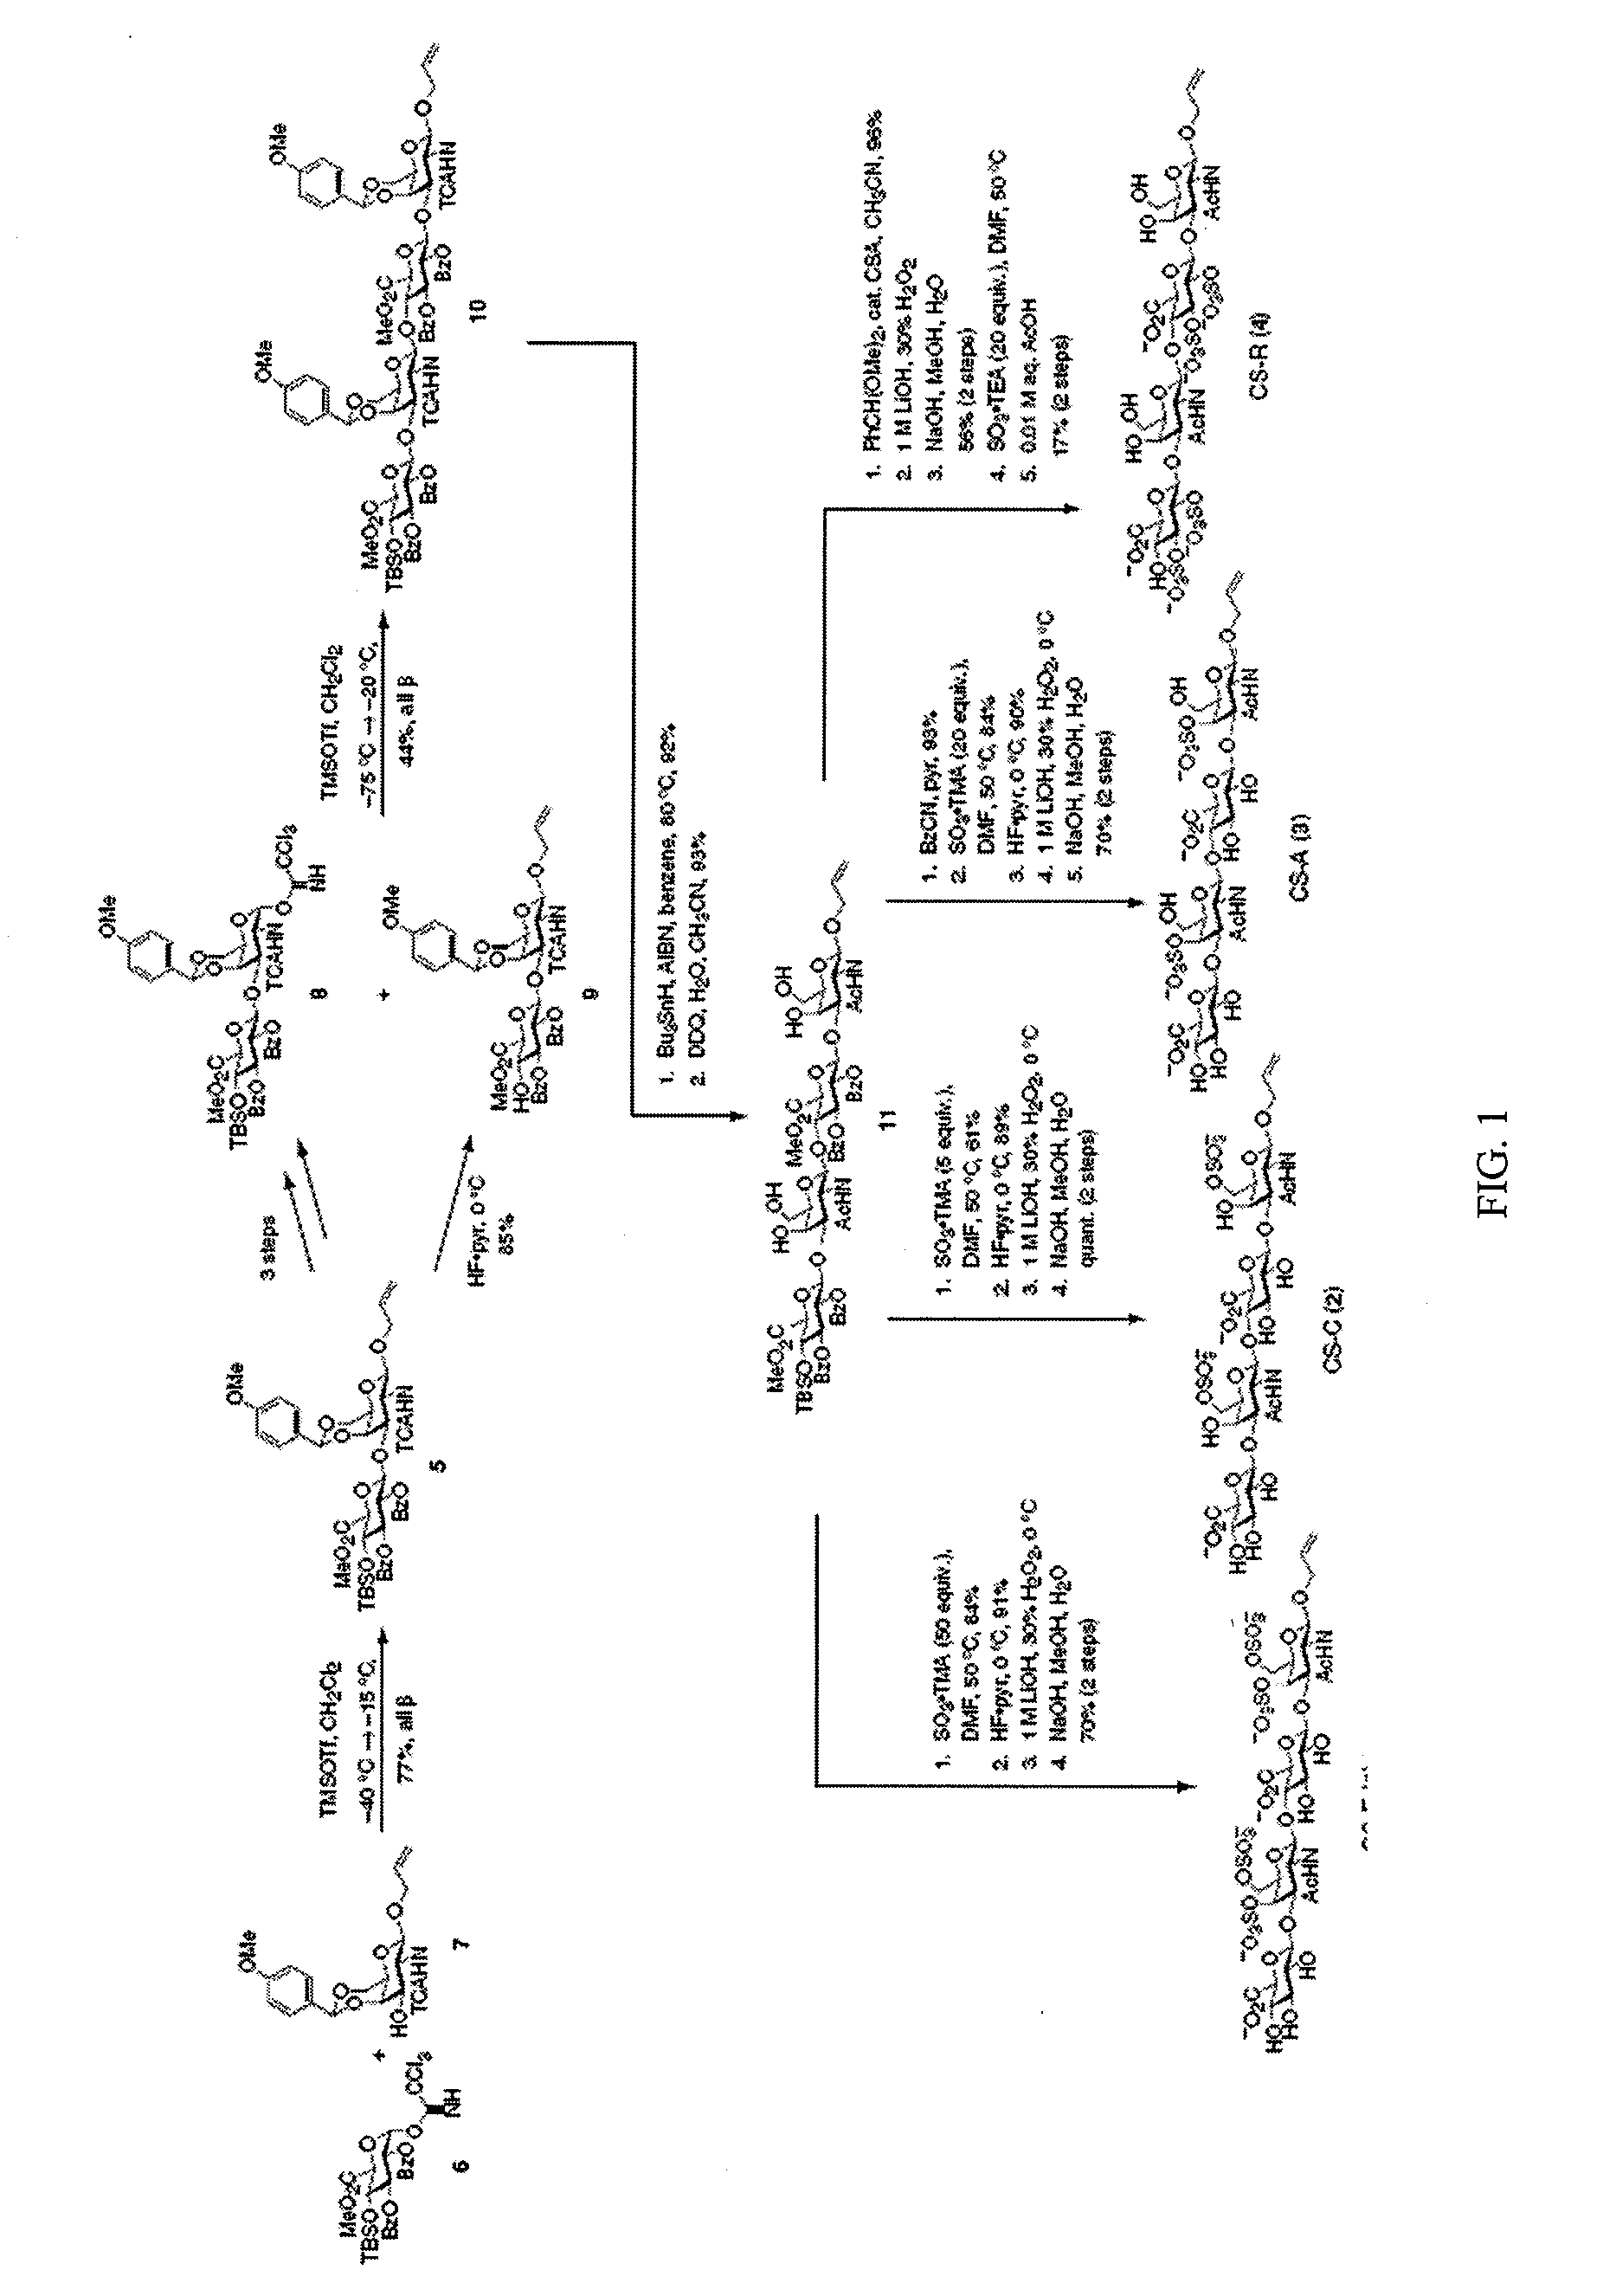 Chondroitin sulfate binding proteins and modulators thereof